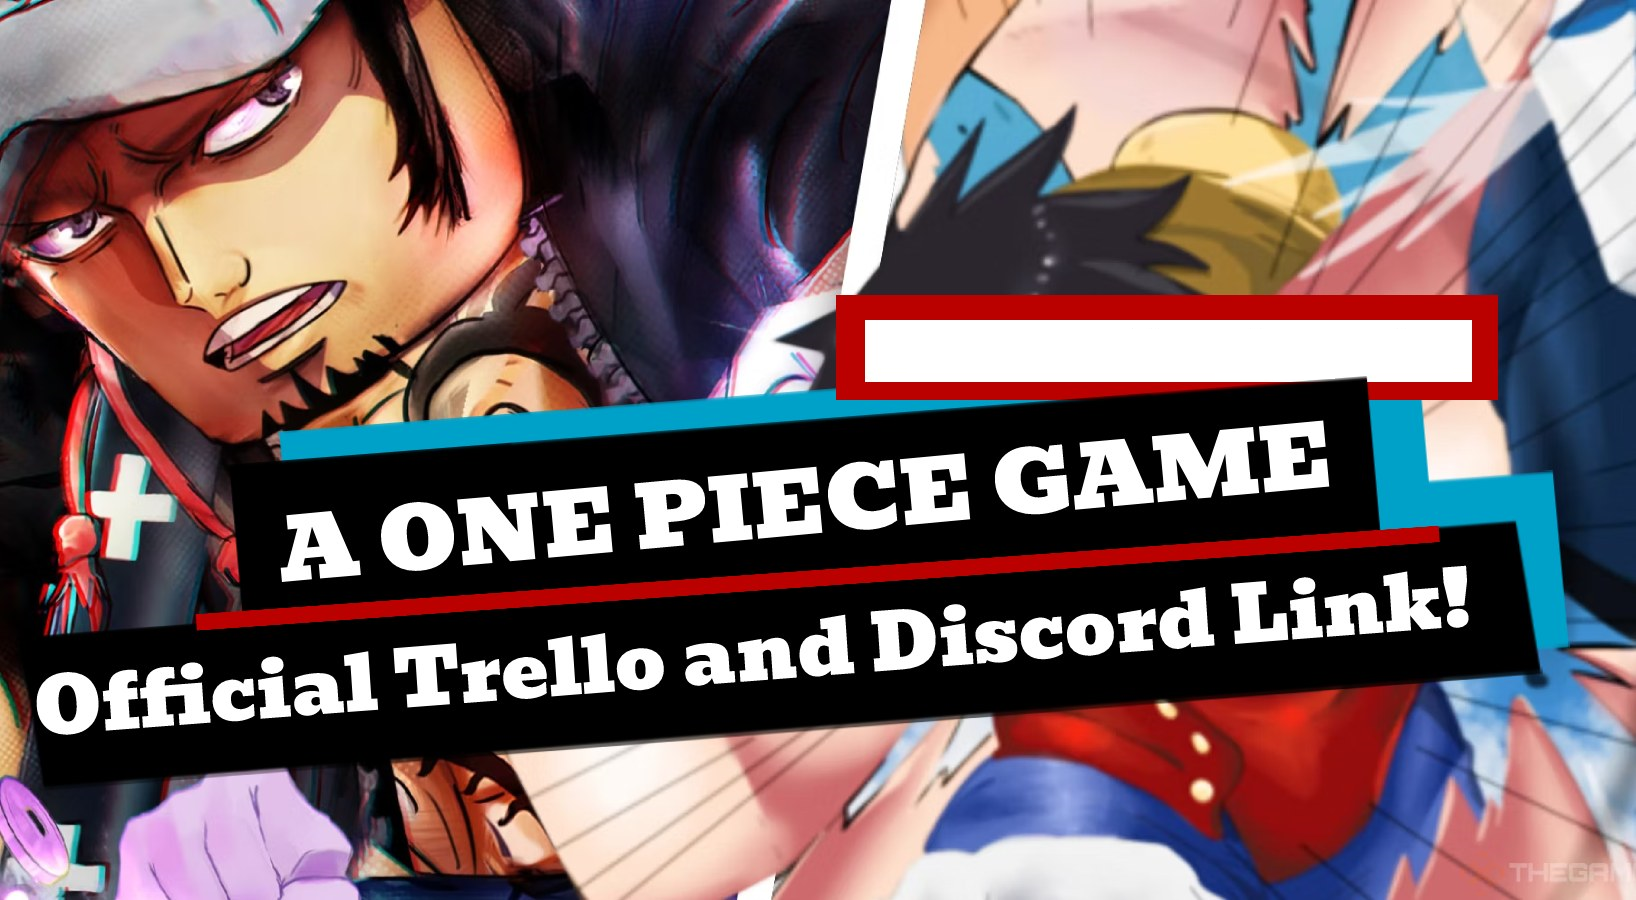 'a one piece game, official trello and discord link' written